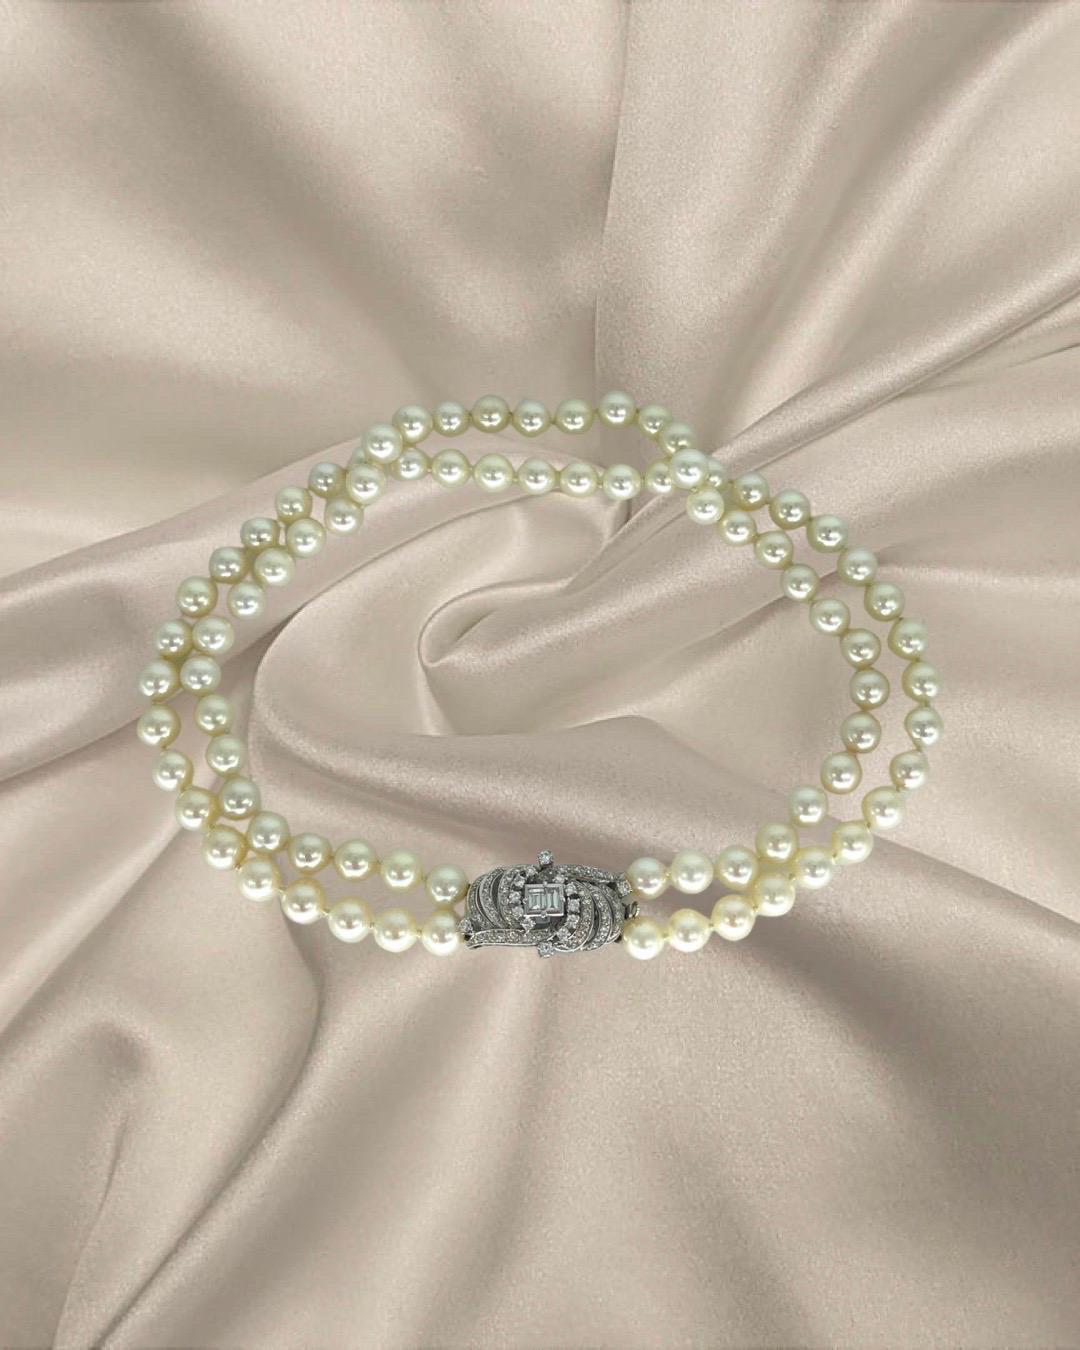 Emerald Cut Antique 5.00 Carat Diamonds and Pearls Choker Necklace 18k White Gold For Sale